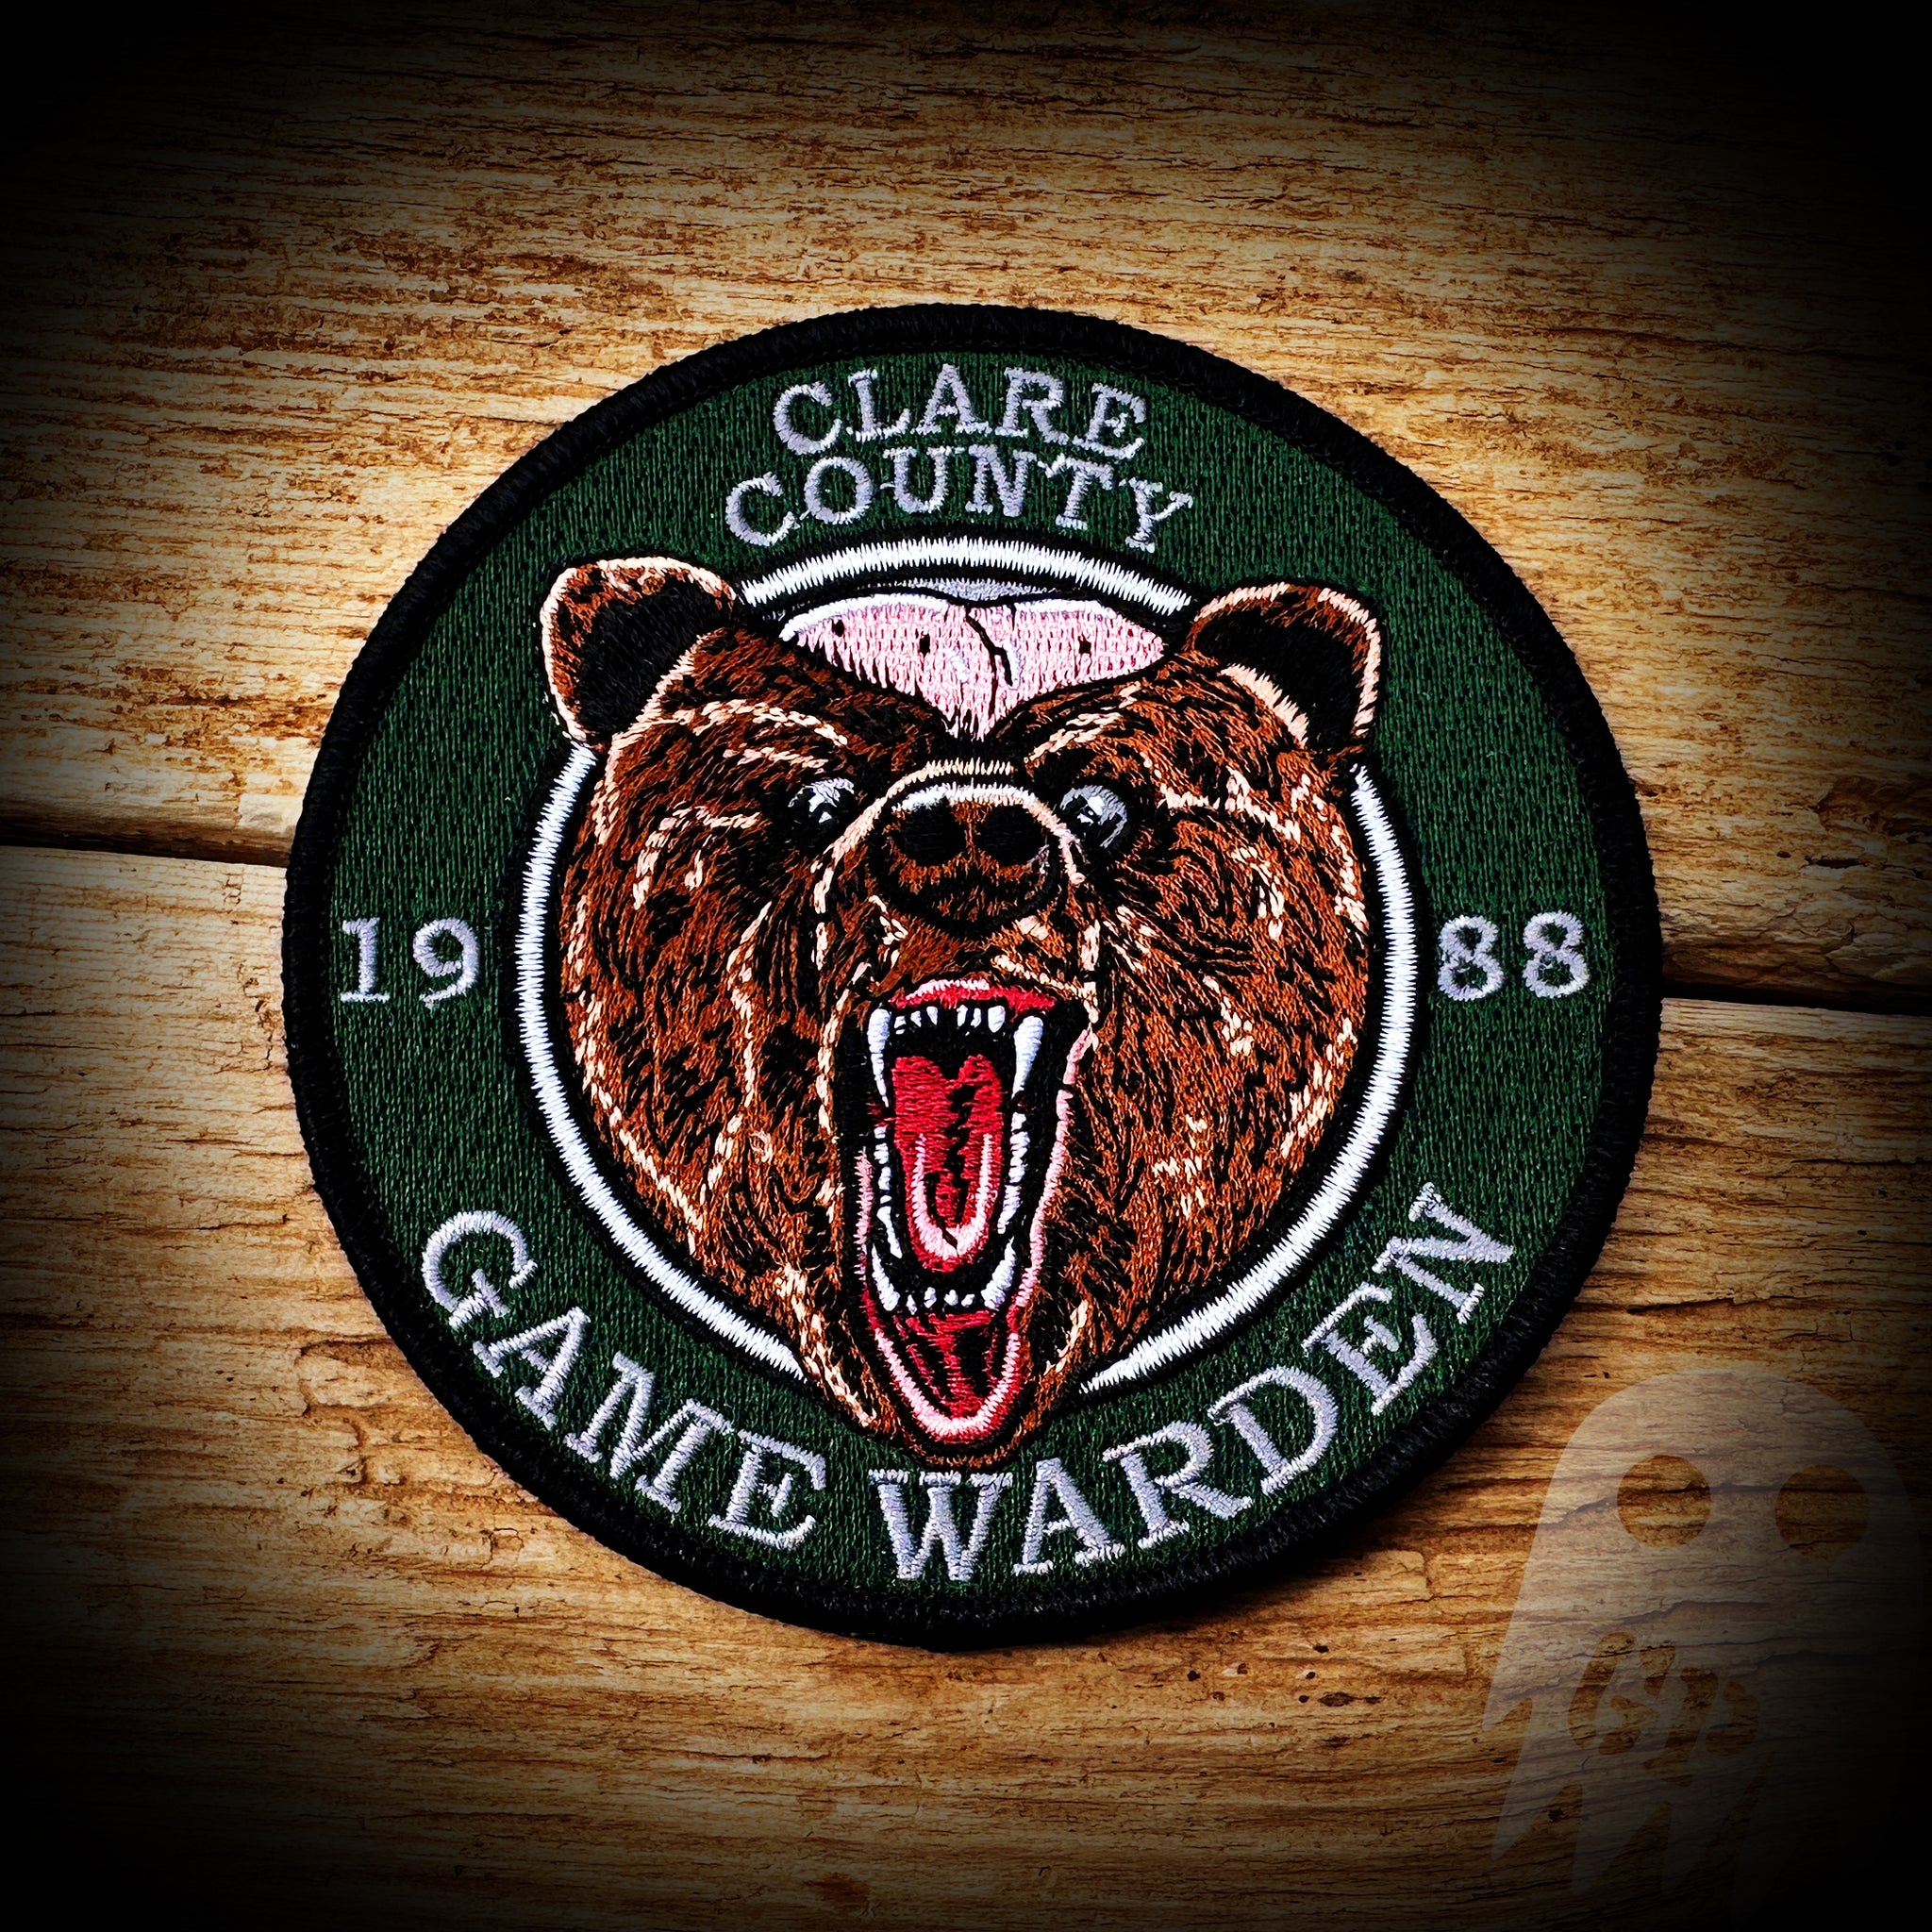 #56 Clare County Game Warden - The Great Outdoors